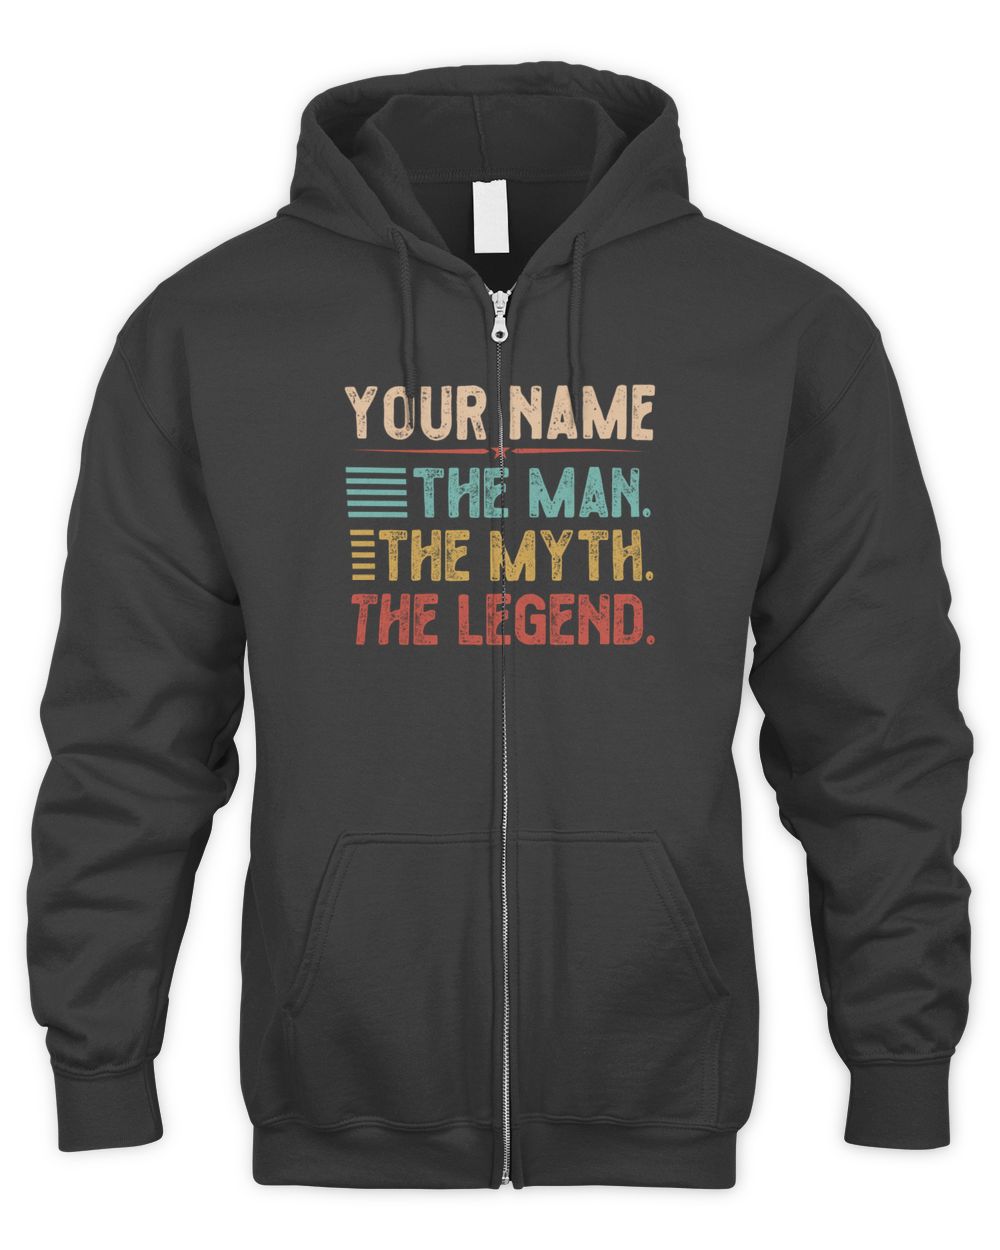 YOUR NAME. The Man. The Myth. The Legend. Great personalised T-Shirts Men's Zip Hoodie black 